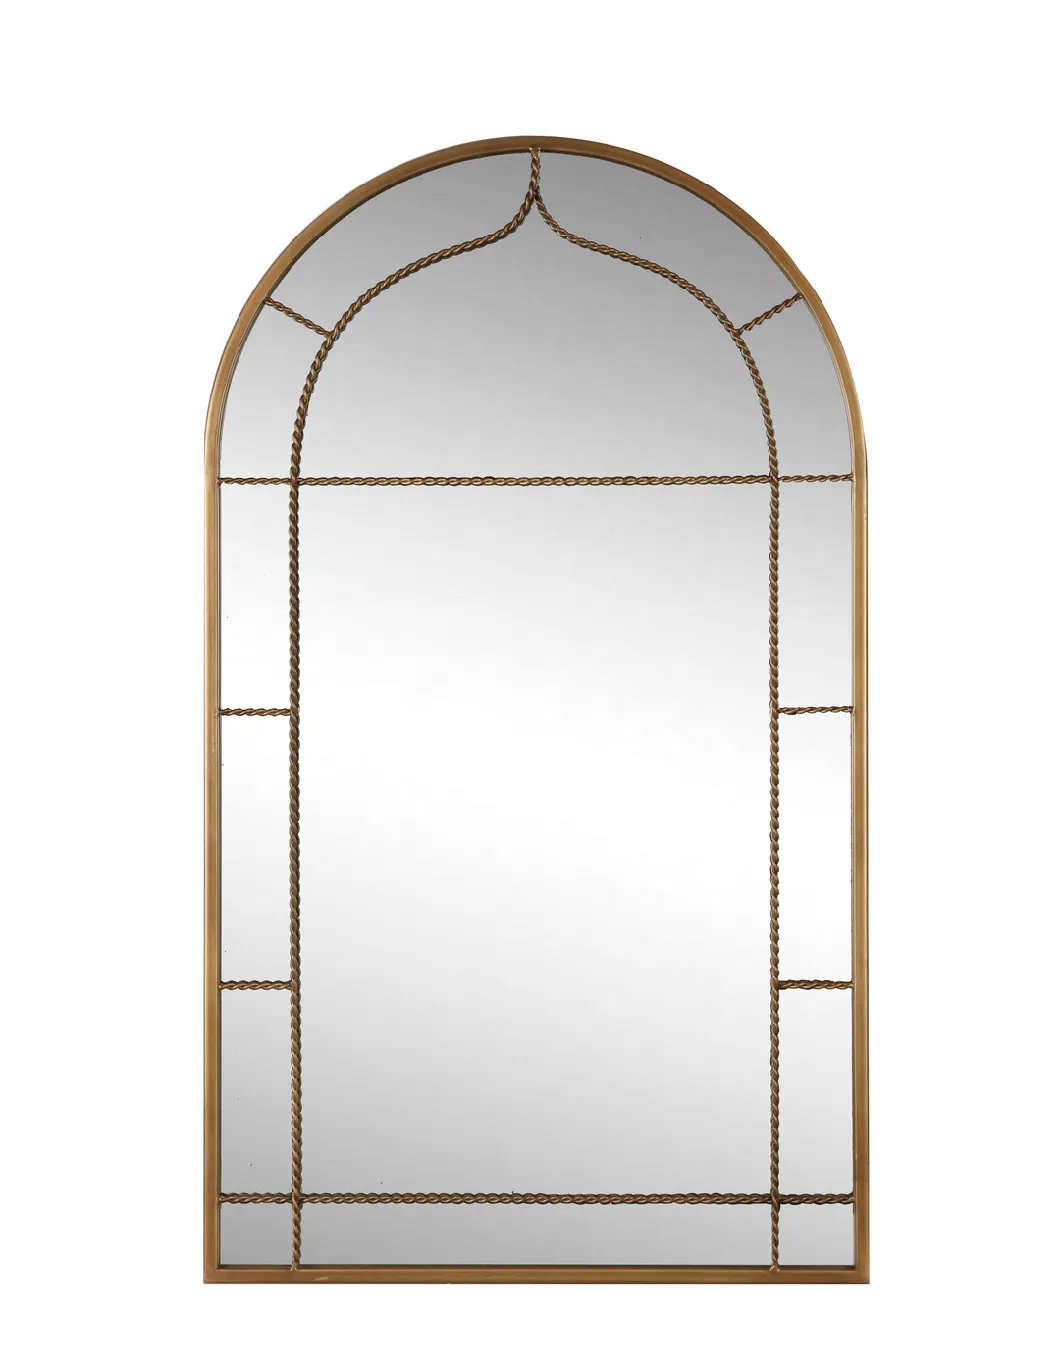 Rustic Large Gold Window Framed Wall Hanging/Standing Decorative Wall Mirrors